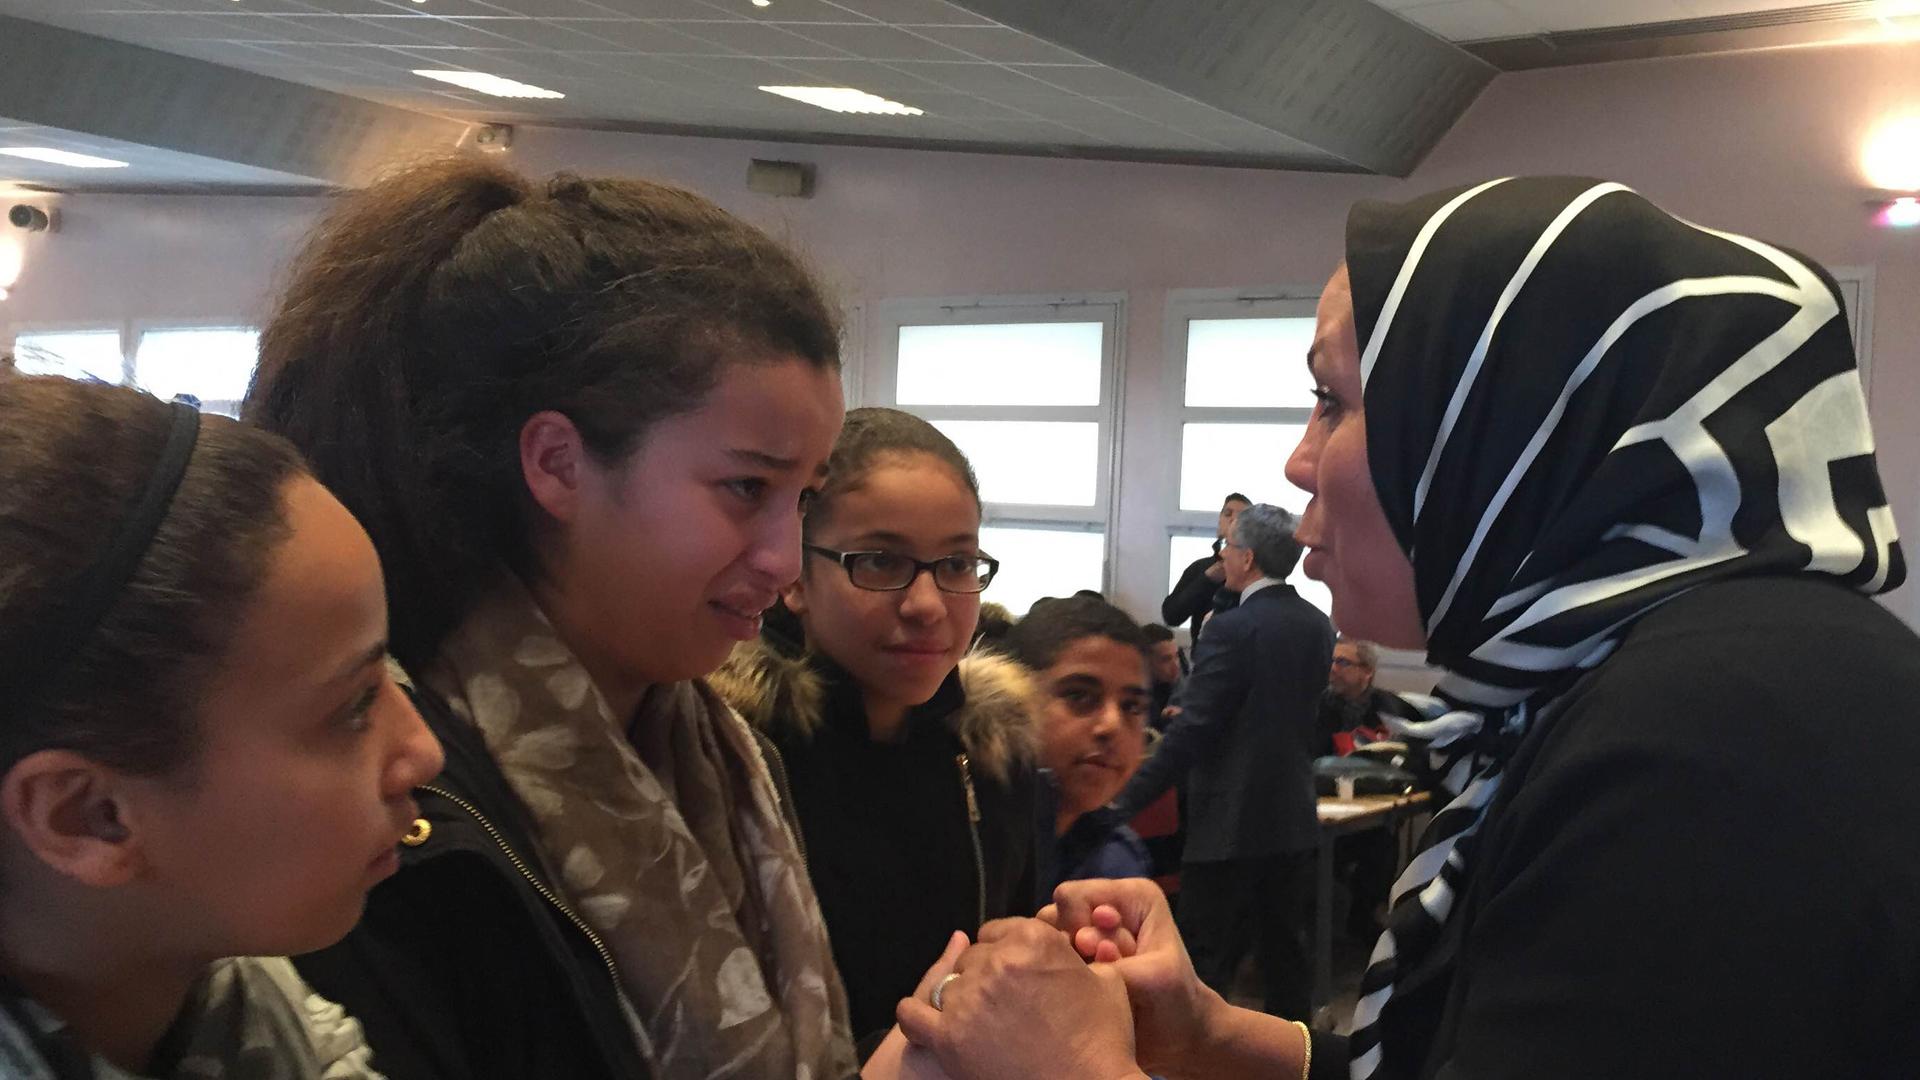 Latifa bin Ziaten (r) speaks with students about her son, Imad, who was murdered by Islamic extremist Mohamed Merah. At the end of her talk, students hug her. One girl says Latifah reminds her of her own mother.